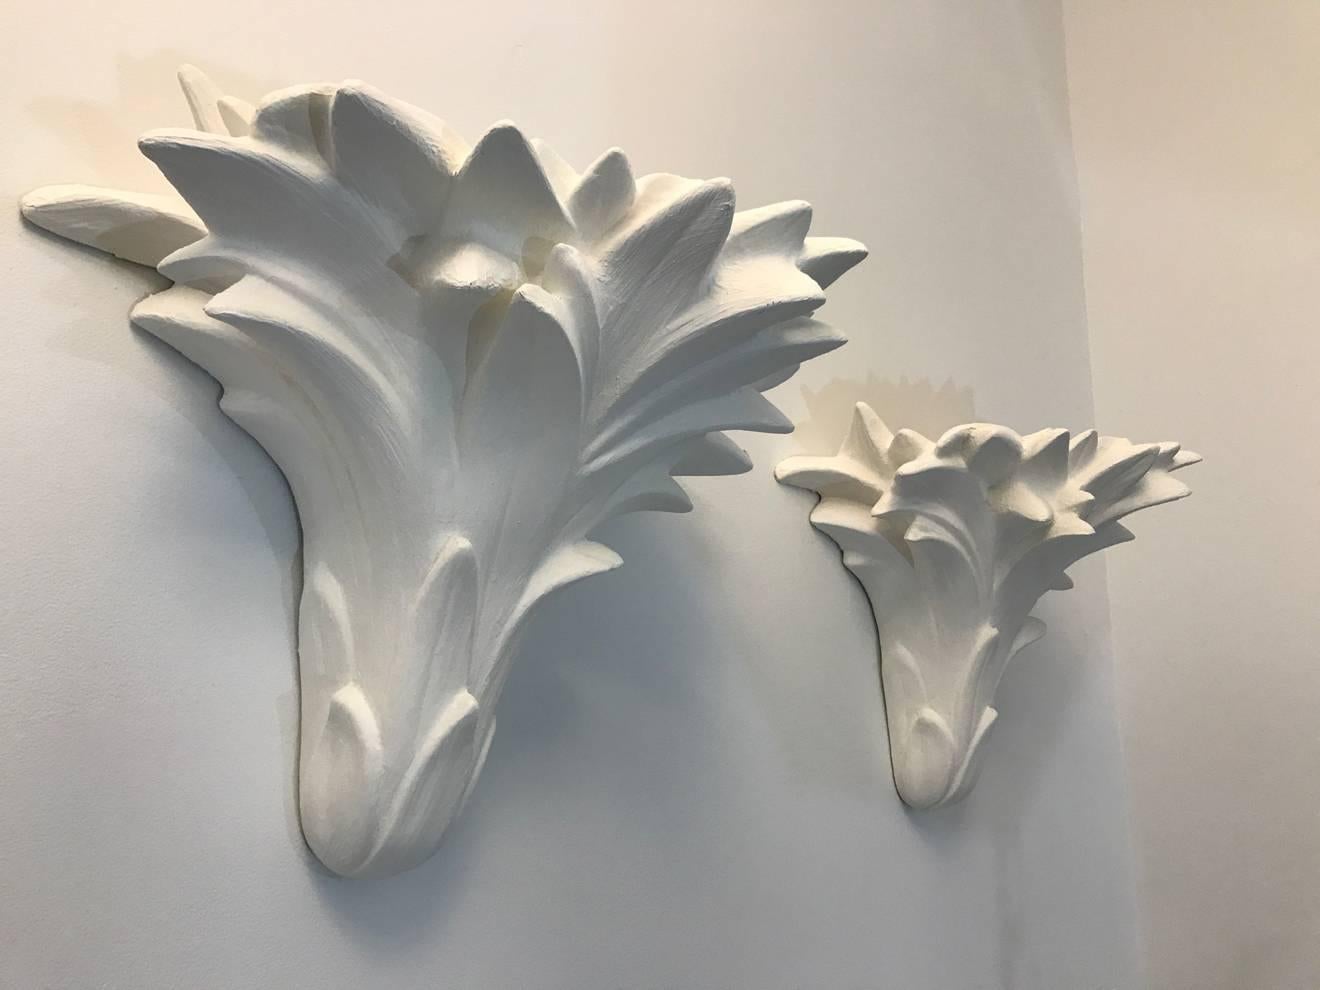 Four Serge Roche style palm sconces with plaster finish circa 1970s.
Refinished and rewired.